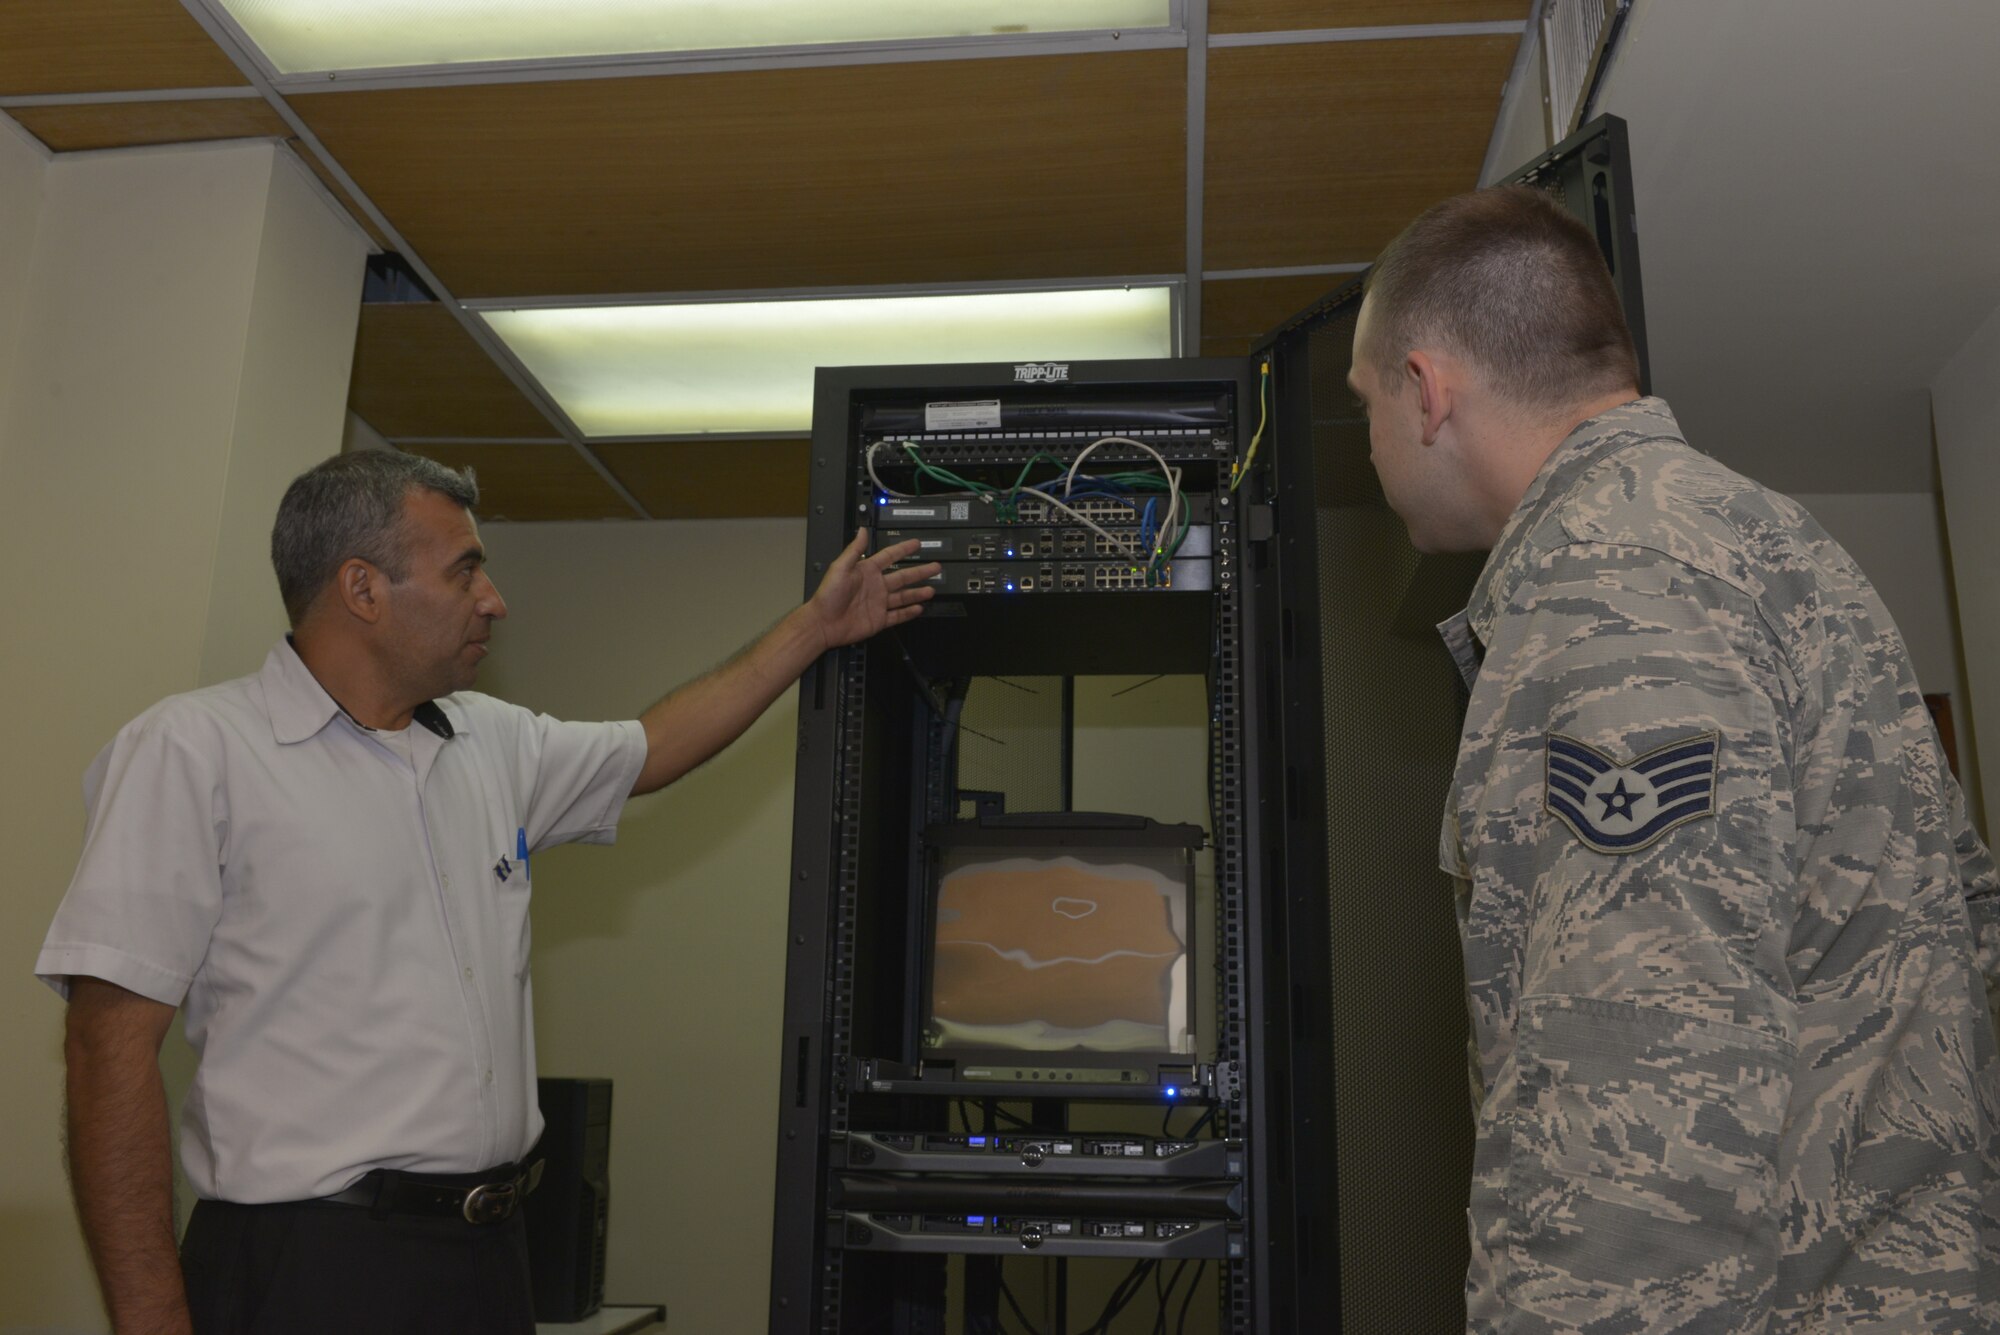 Arnoldo Inocencio Rivas Molina, a force development sustainment systems engineer with La Fuerza Armada de El Salvador, shows off a virtual cyber training system to U.S. Air Force Staff Sgt. Alan Dwyer, a cyber systems operations specialist assigned to the 157th Communications Flight, New Hampshire Air National Guard, San Salvador, El Salvador, Sept. 27, 2018. Dwyer is part of a multi-state National Guard State Partnership Program, headed by the New Hampshire National Guard, in order to help assess and determine recommendations for the Salvadoran Army as they stand up a cyber security unit. (N.H. Air National Guard photo by Tech. Sgt. Aaron Vezeau)